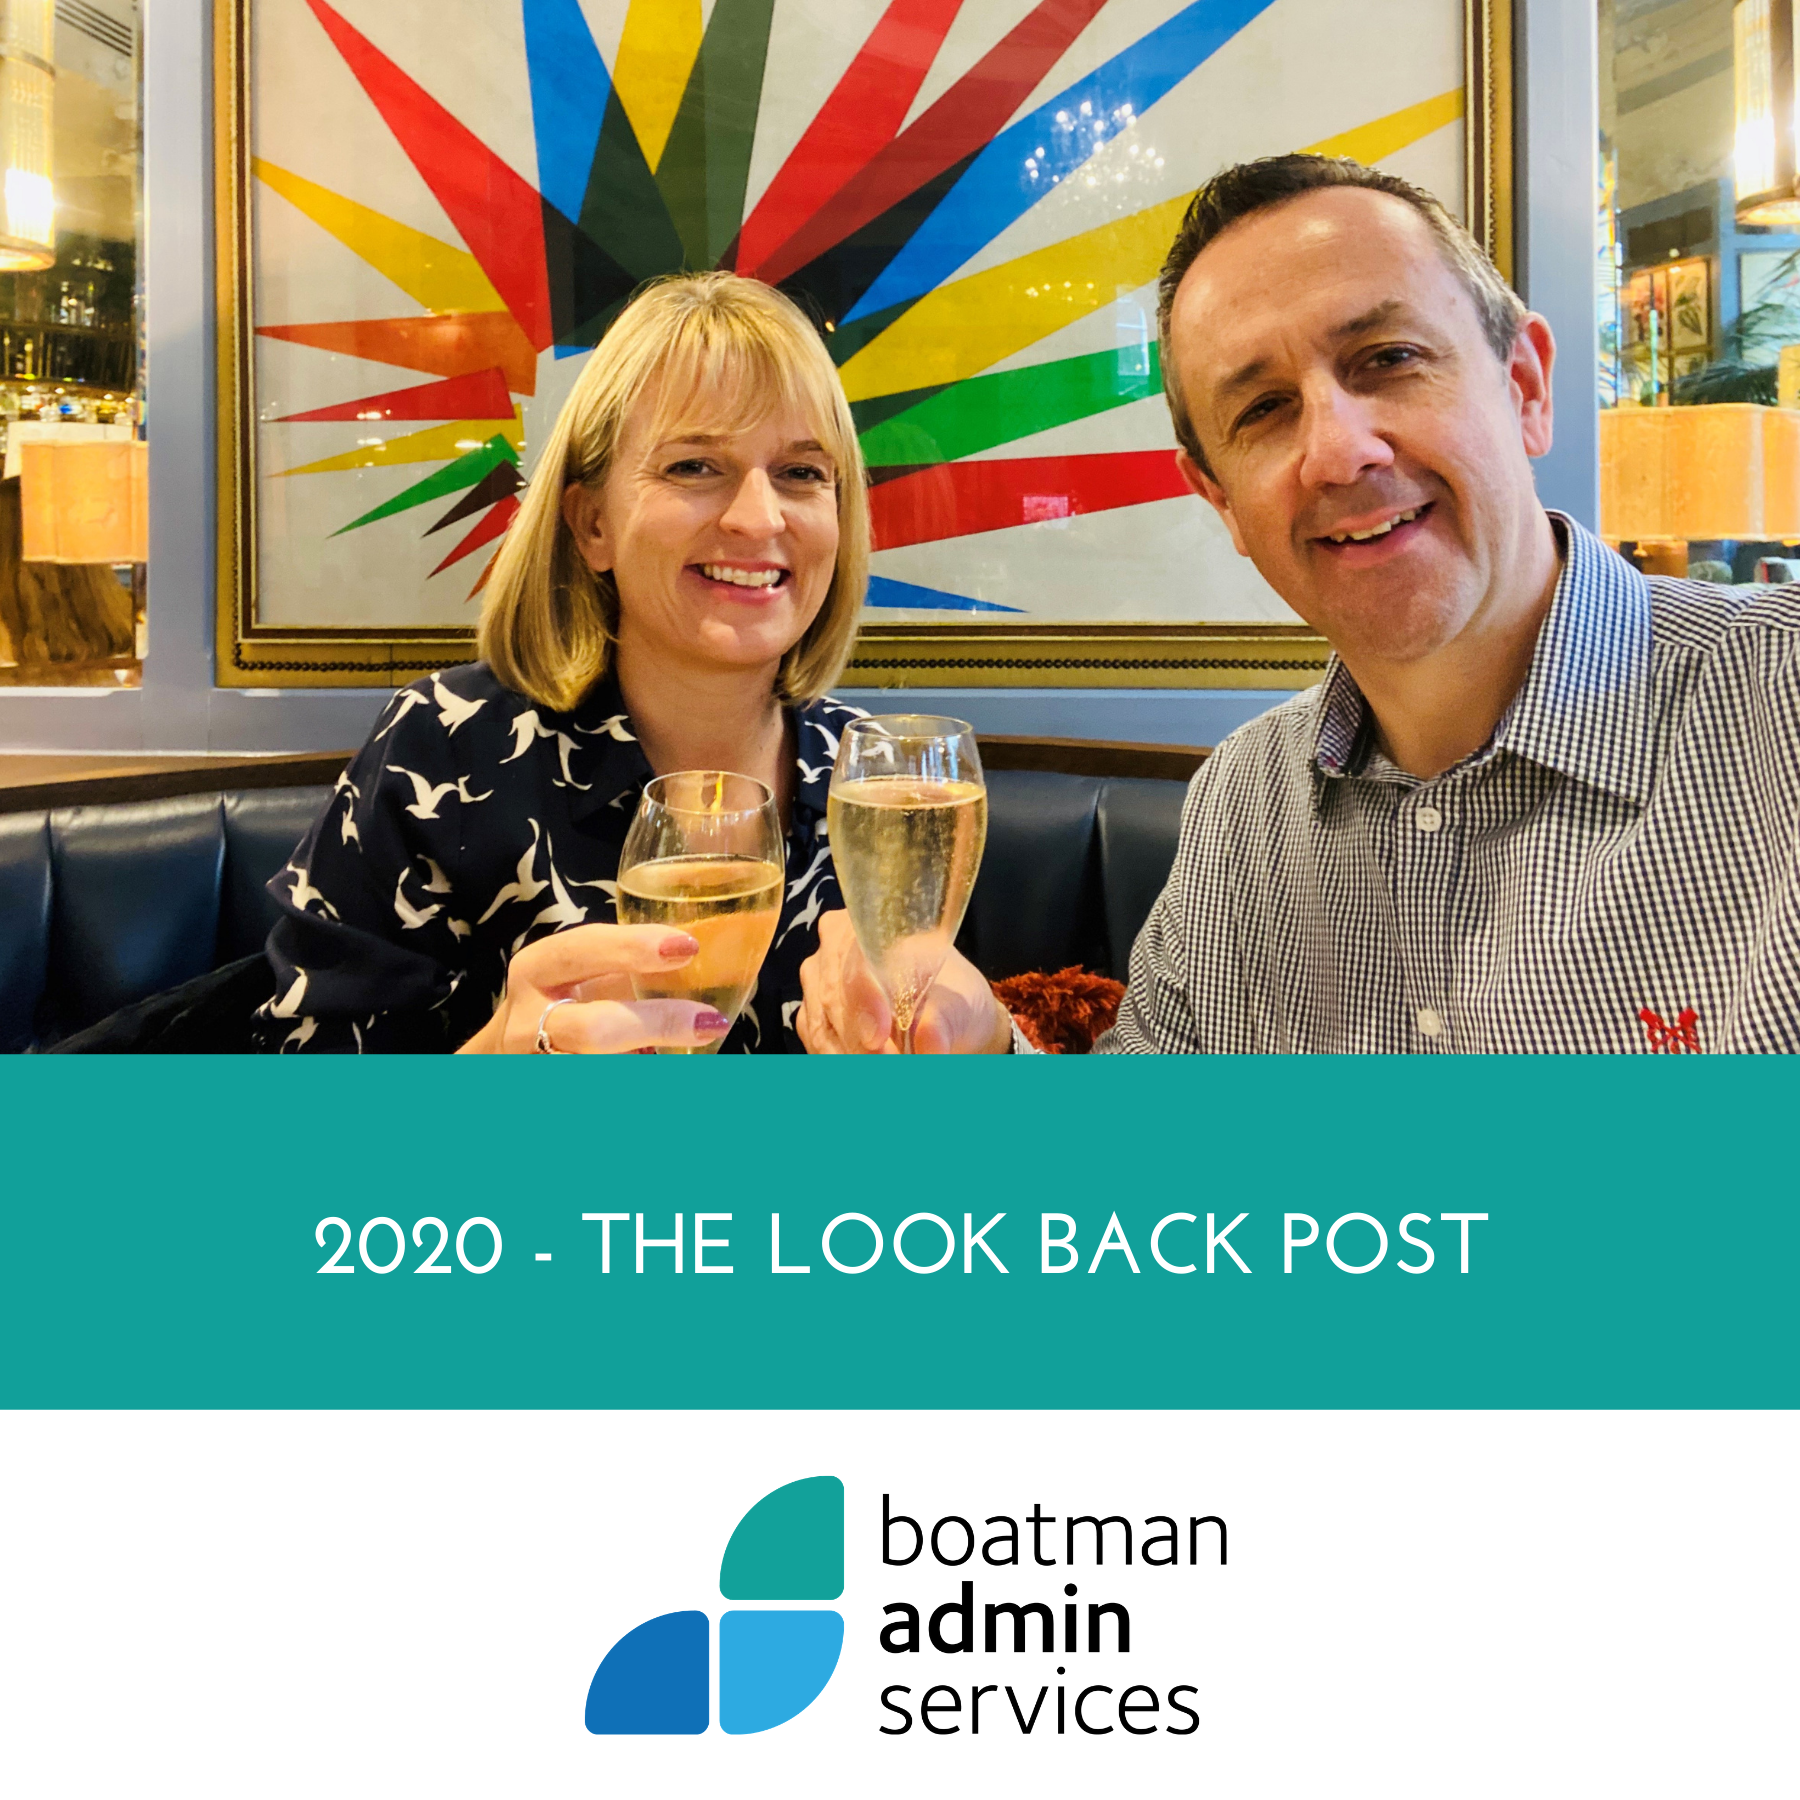 2020 - The Look Back Post